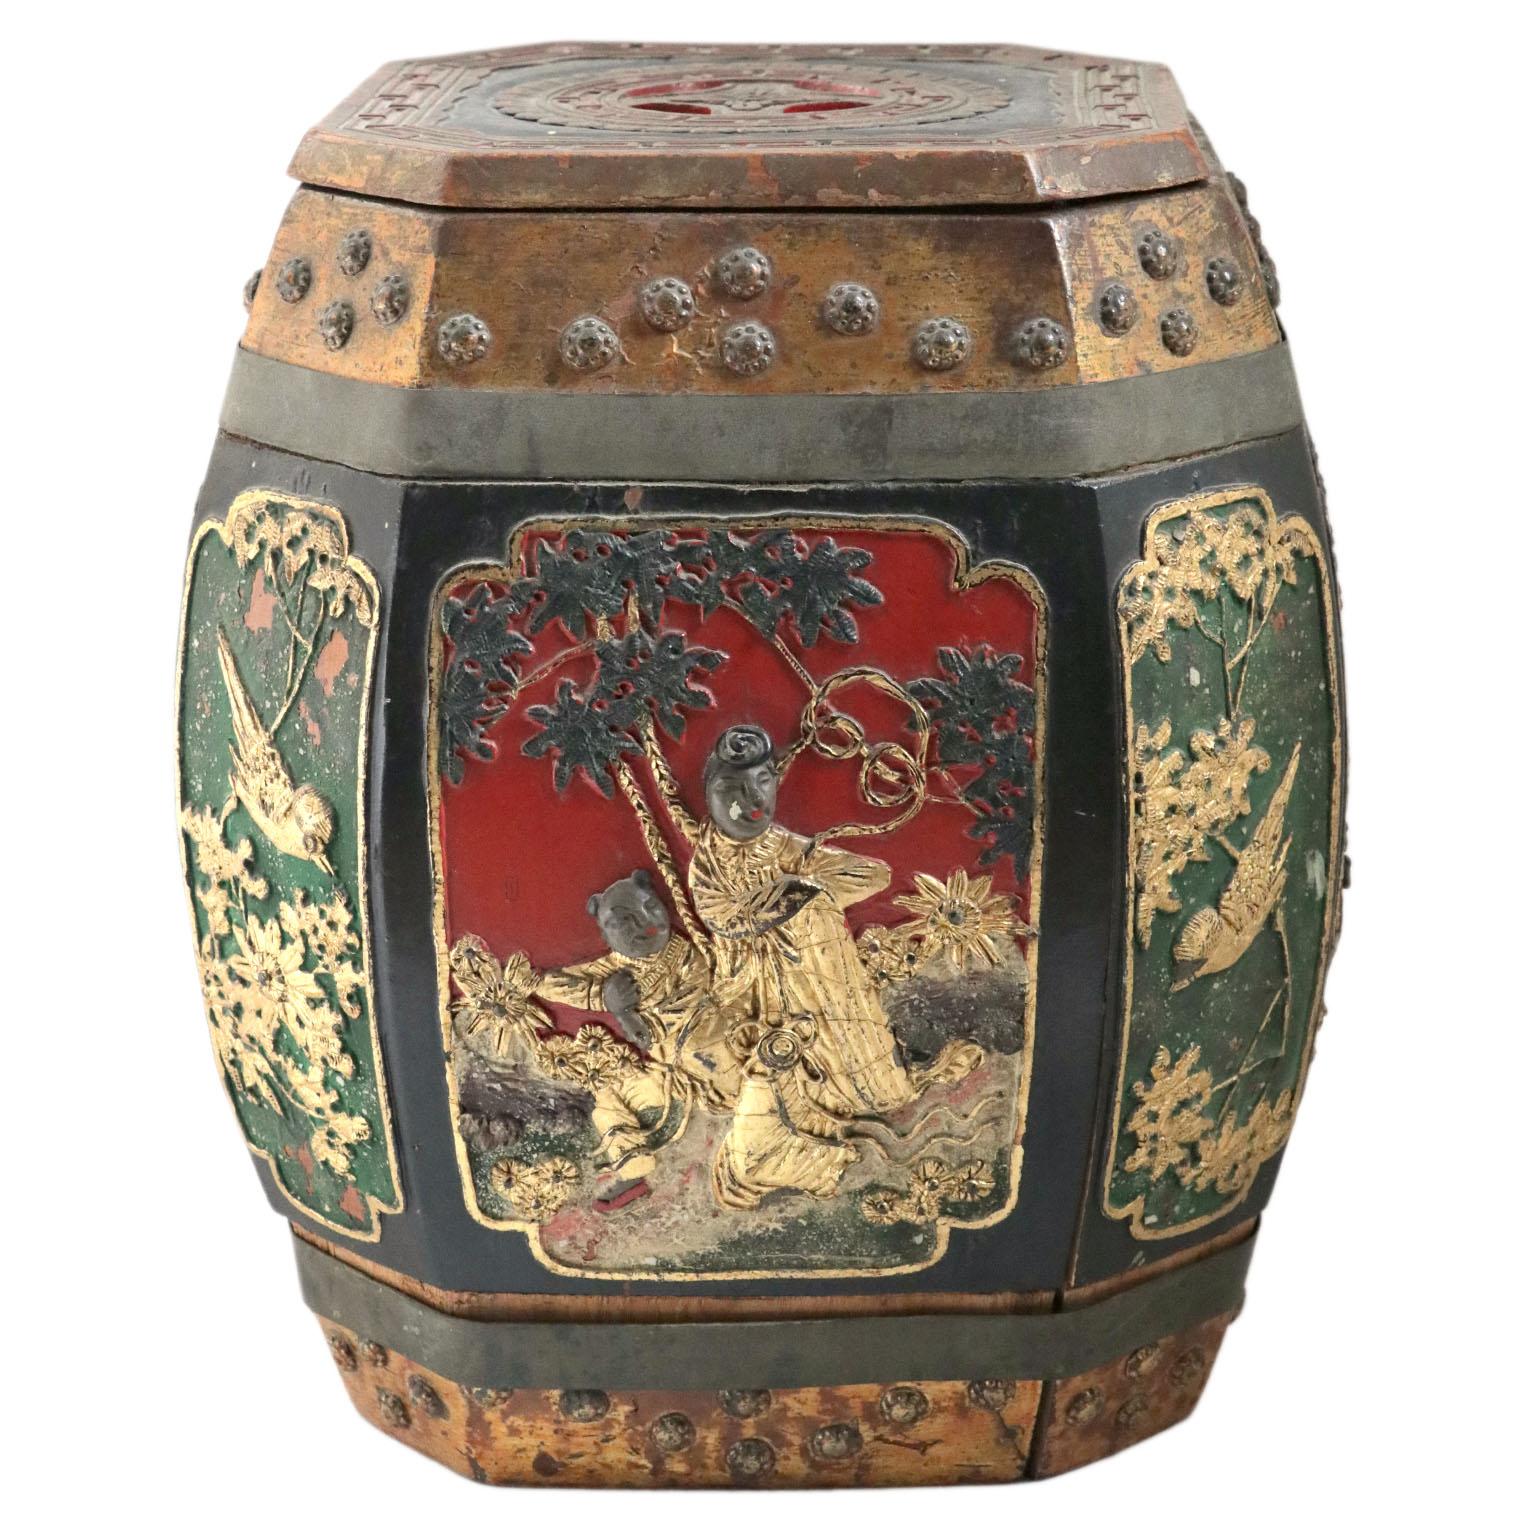 A decorative wooden Chinese rice barrel.